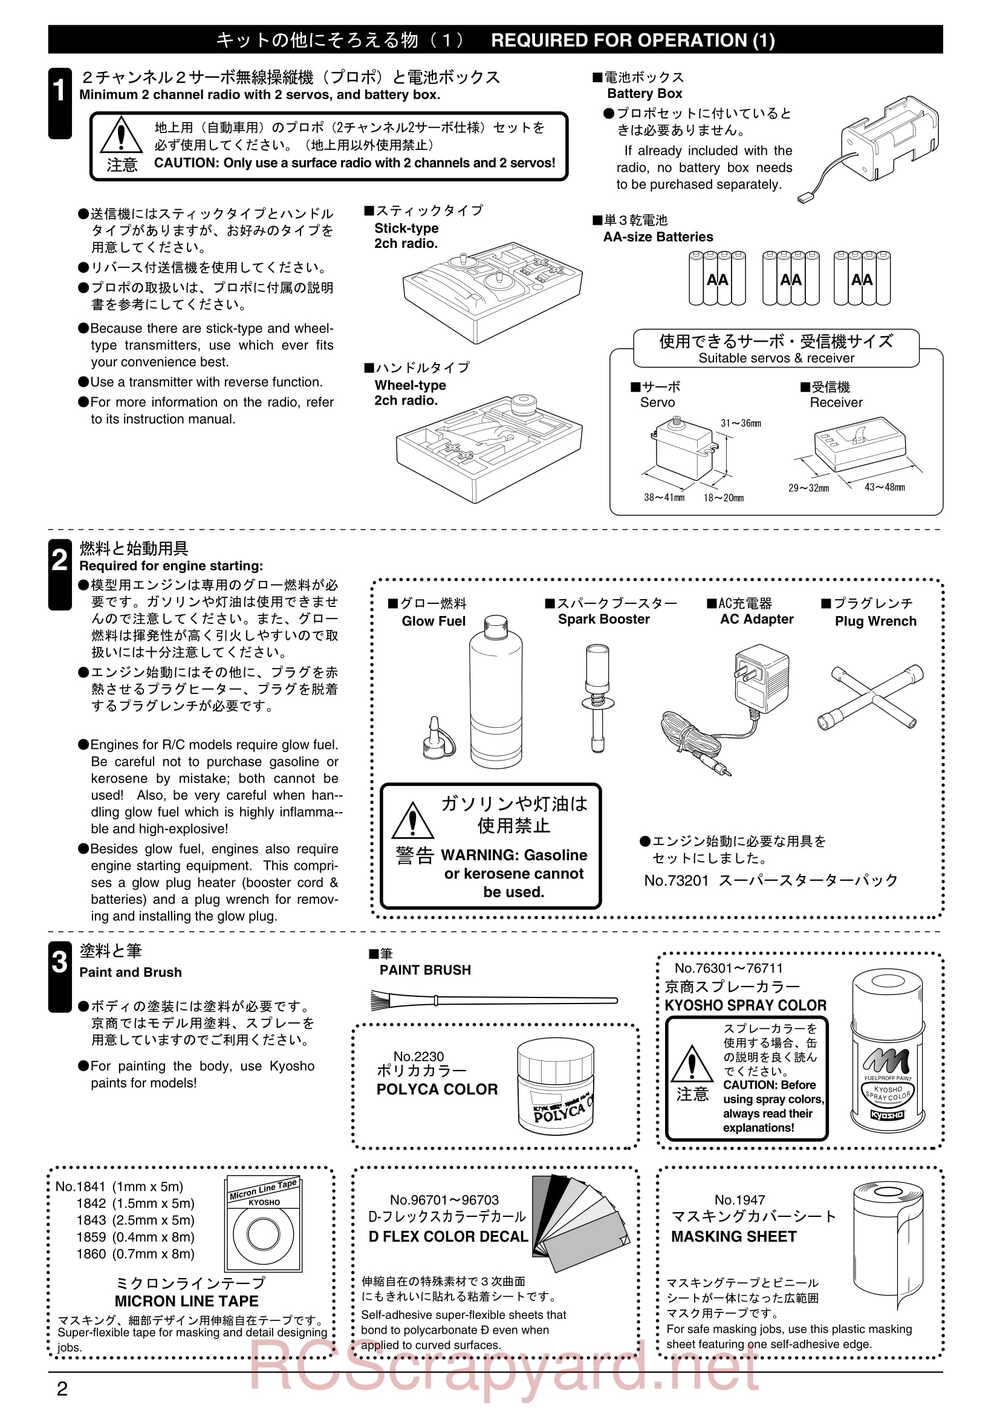 Kyosho - 31213 - TR-15 Monster-Touring - Manual - Page 02